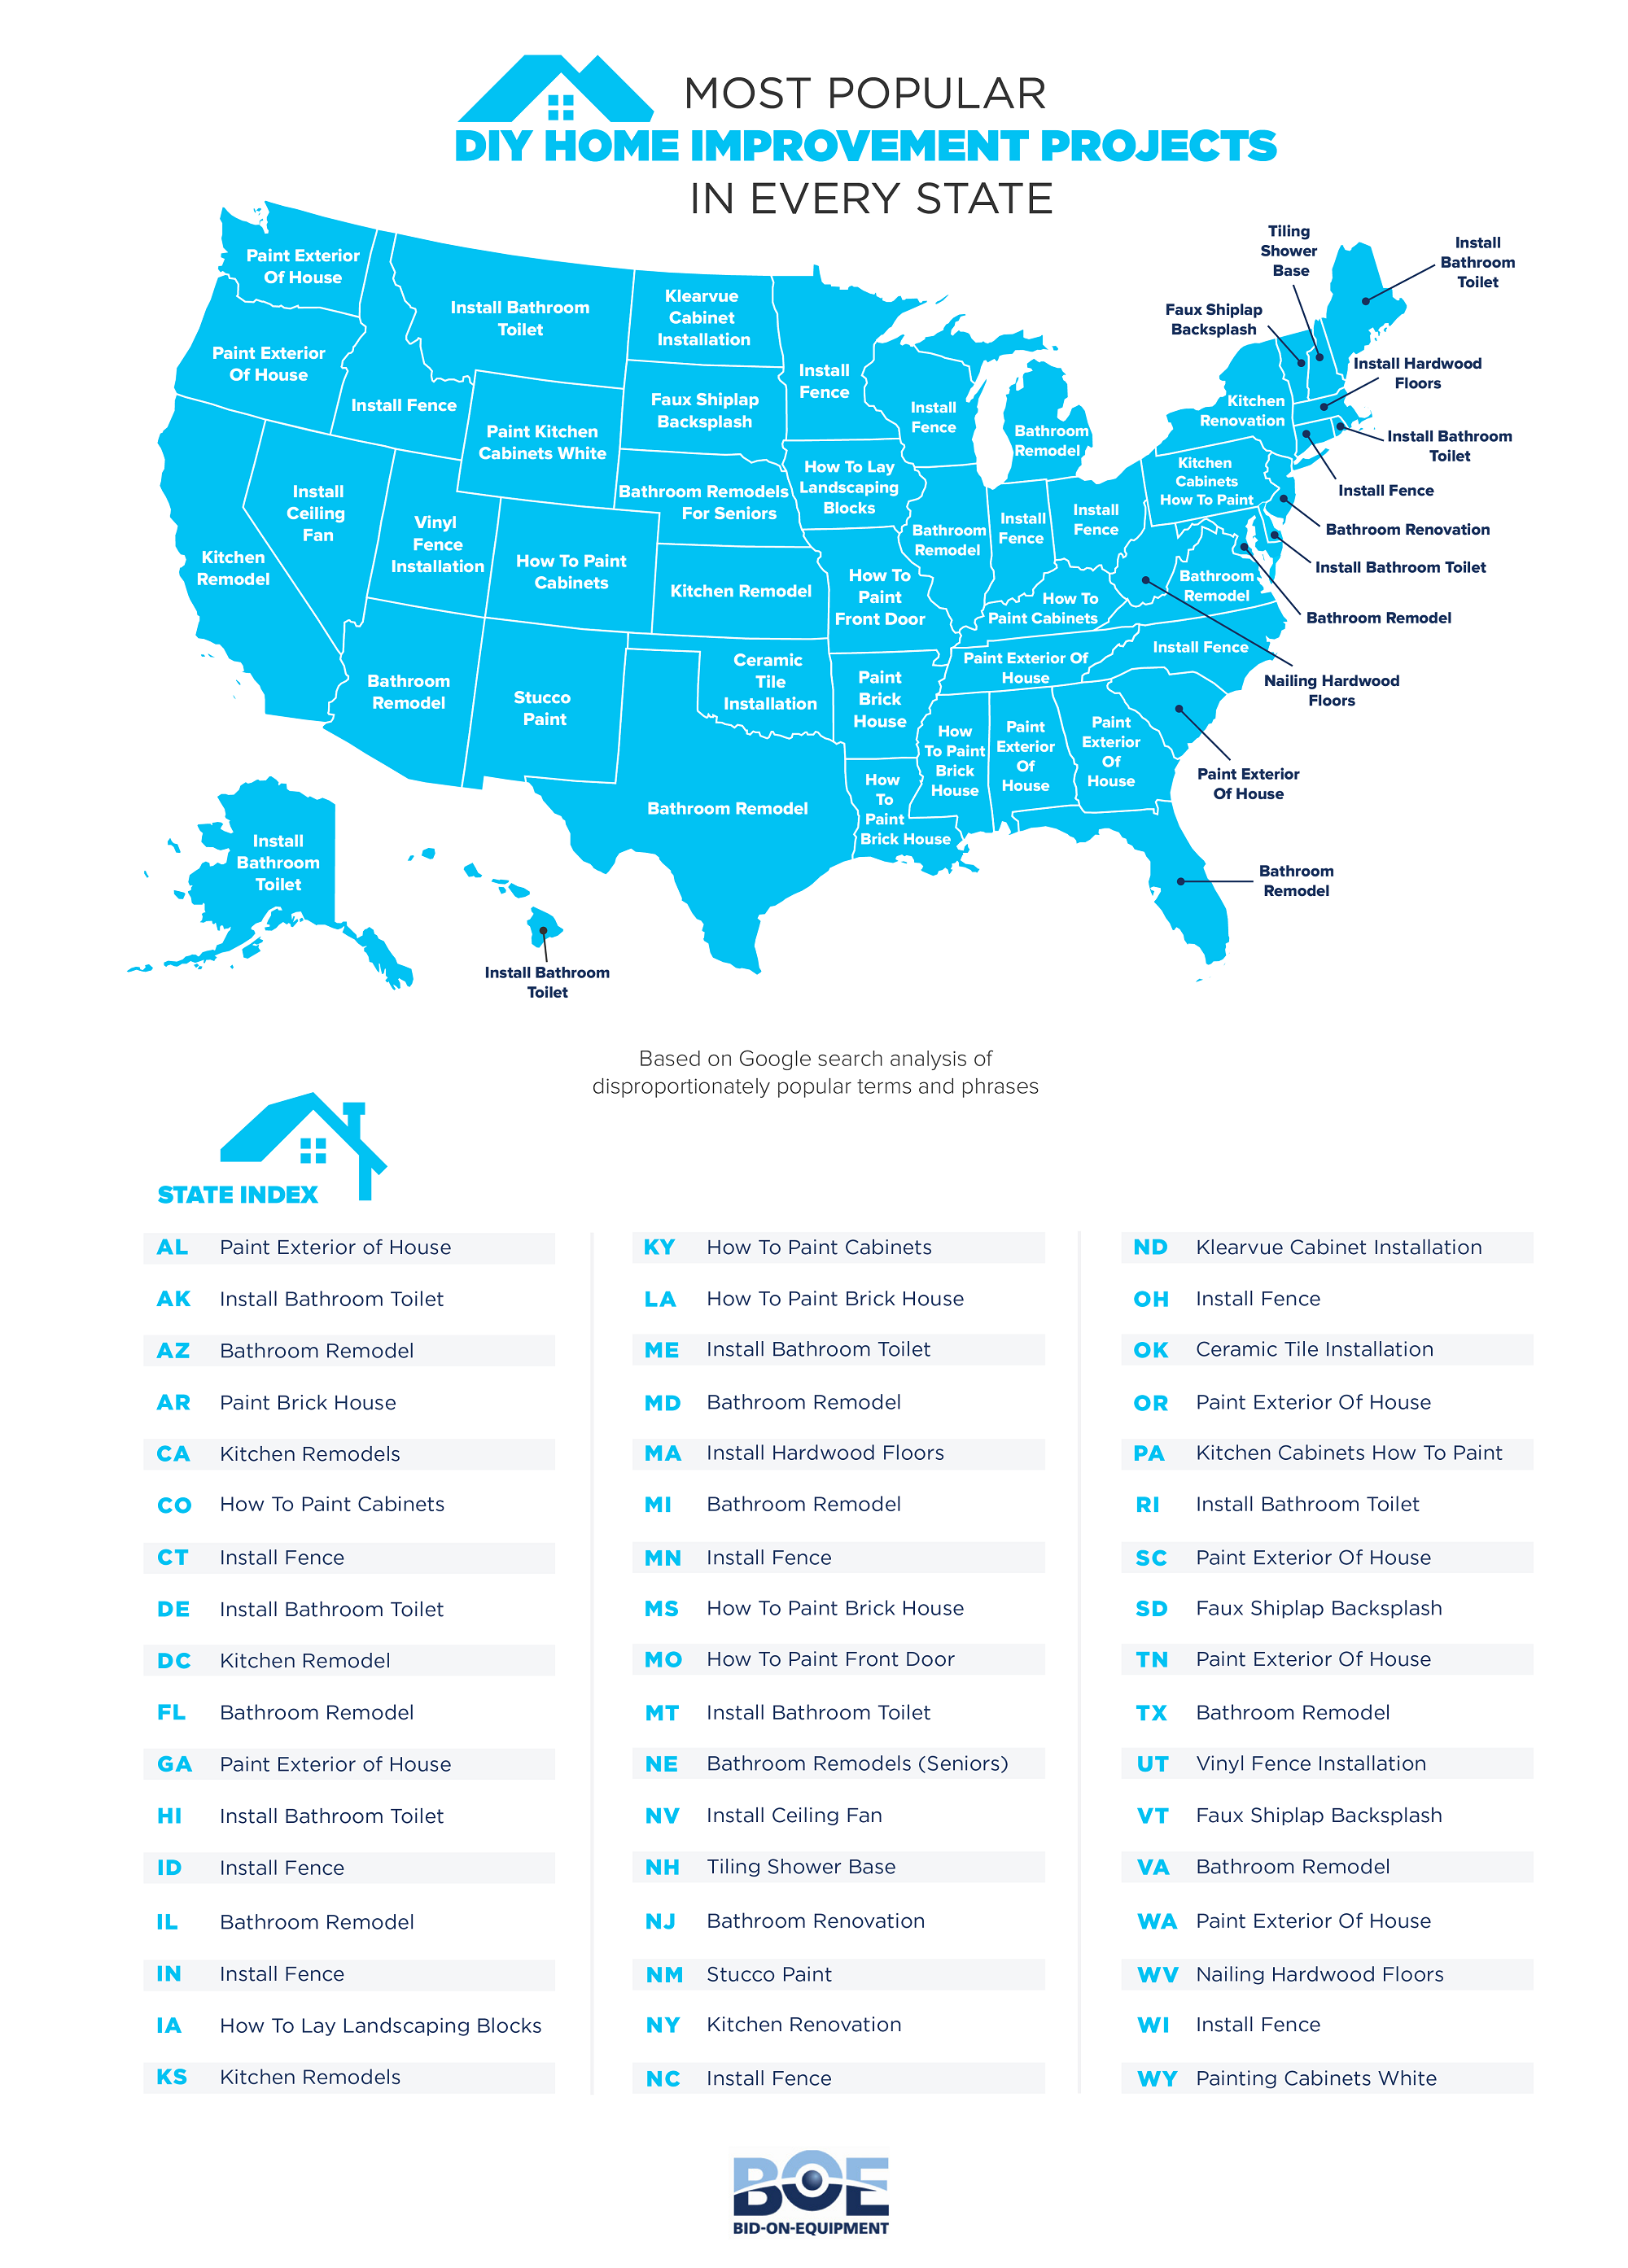 Most Popular DIY Home Improvement Projects in Every State